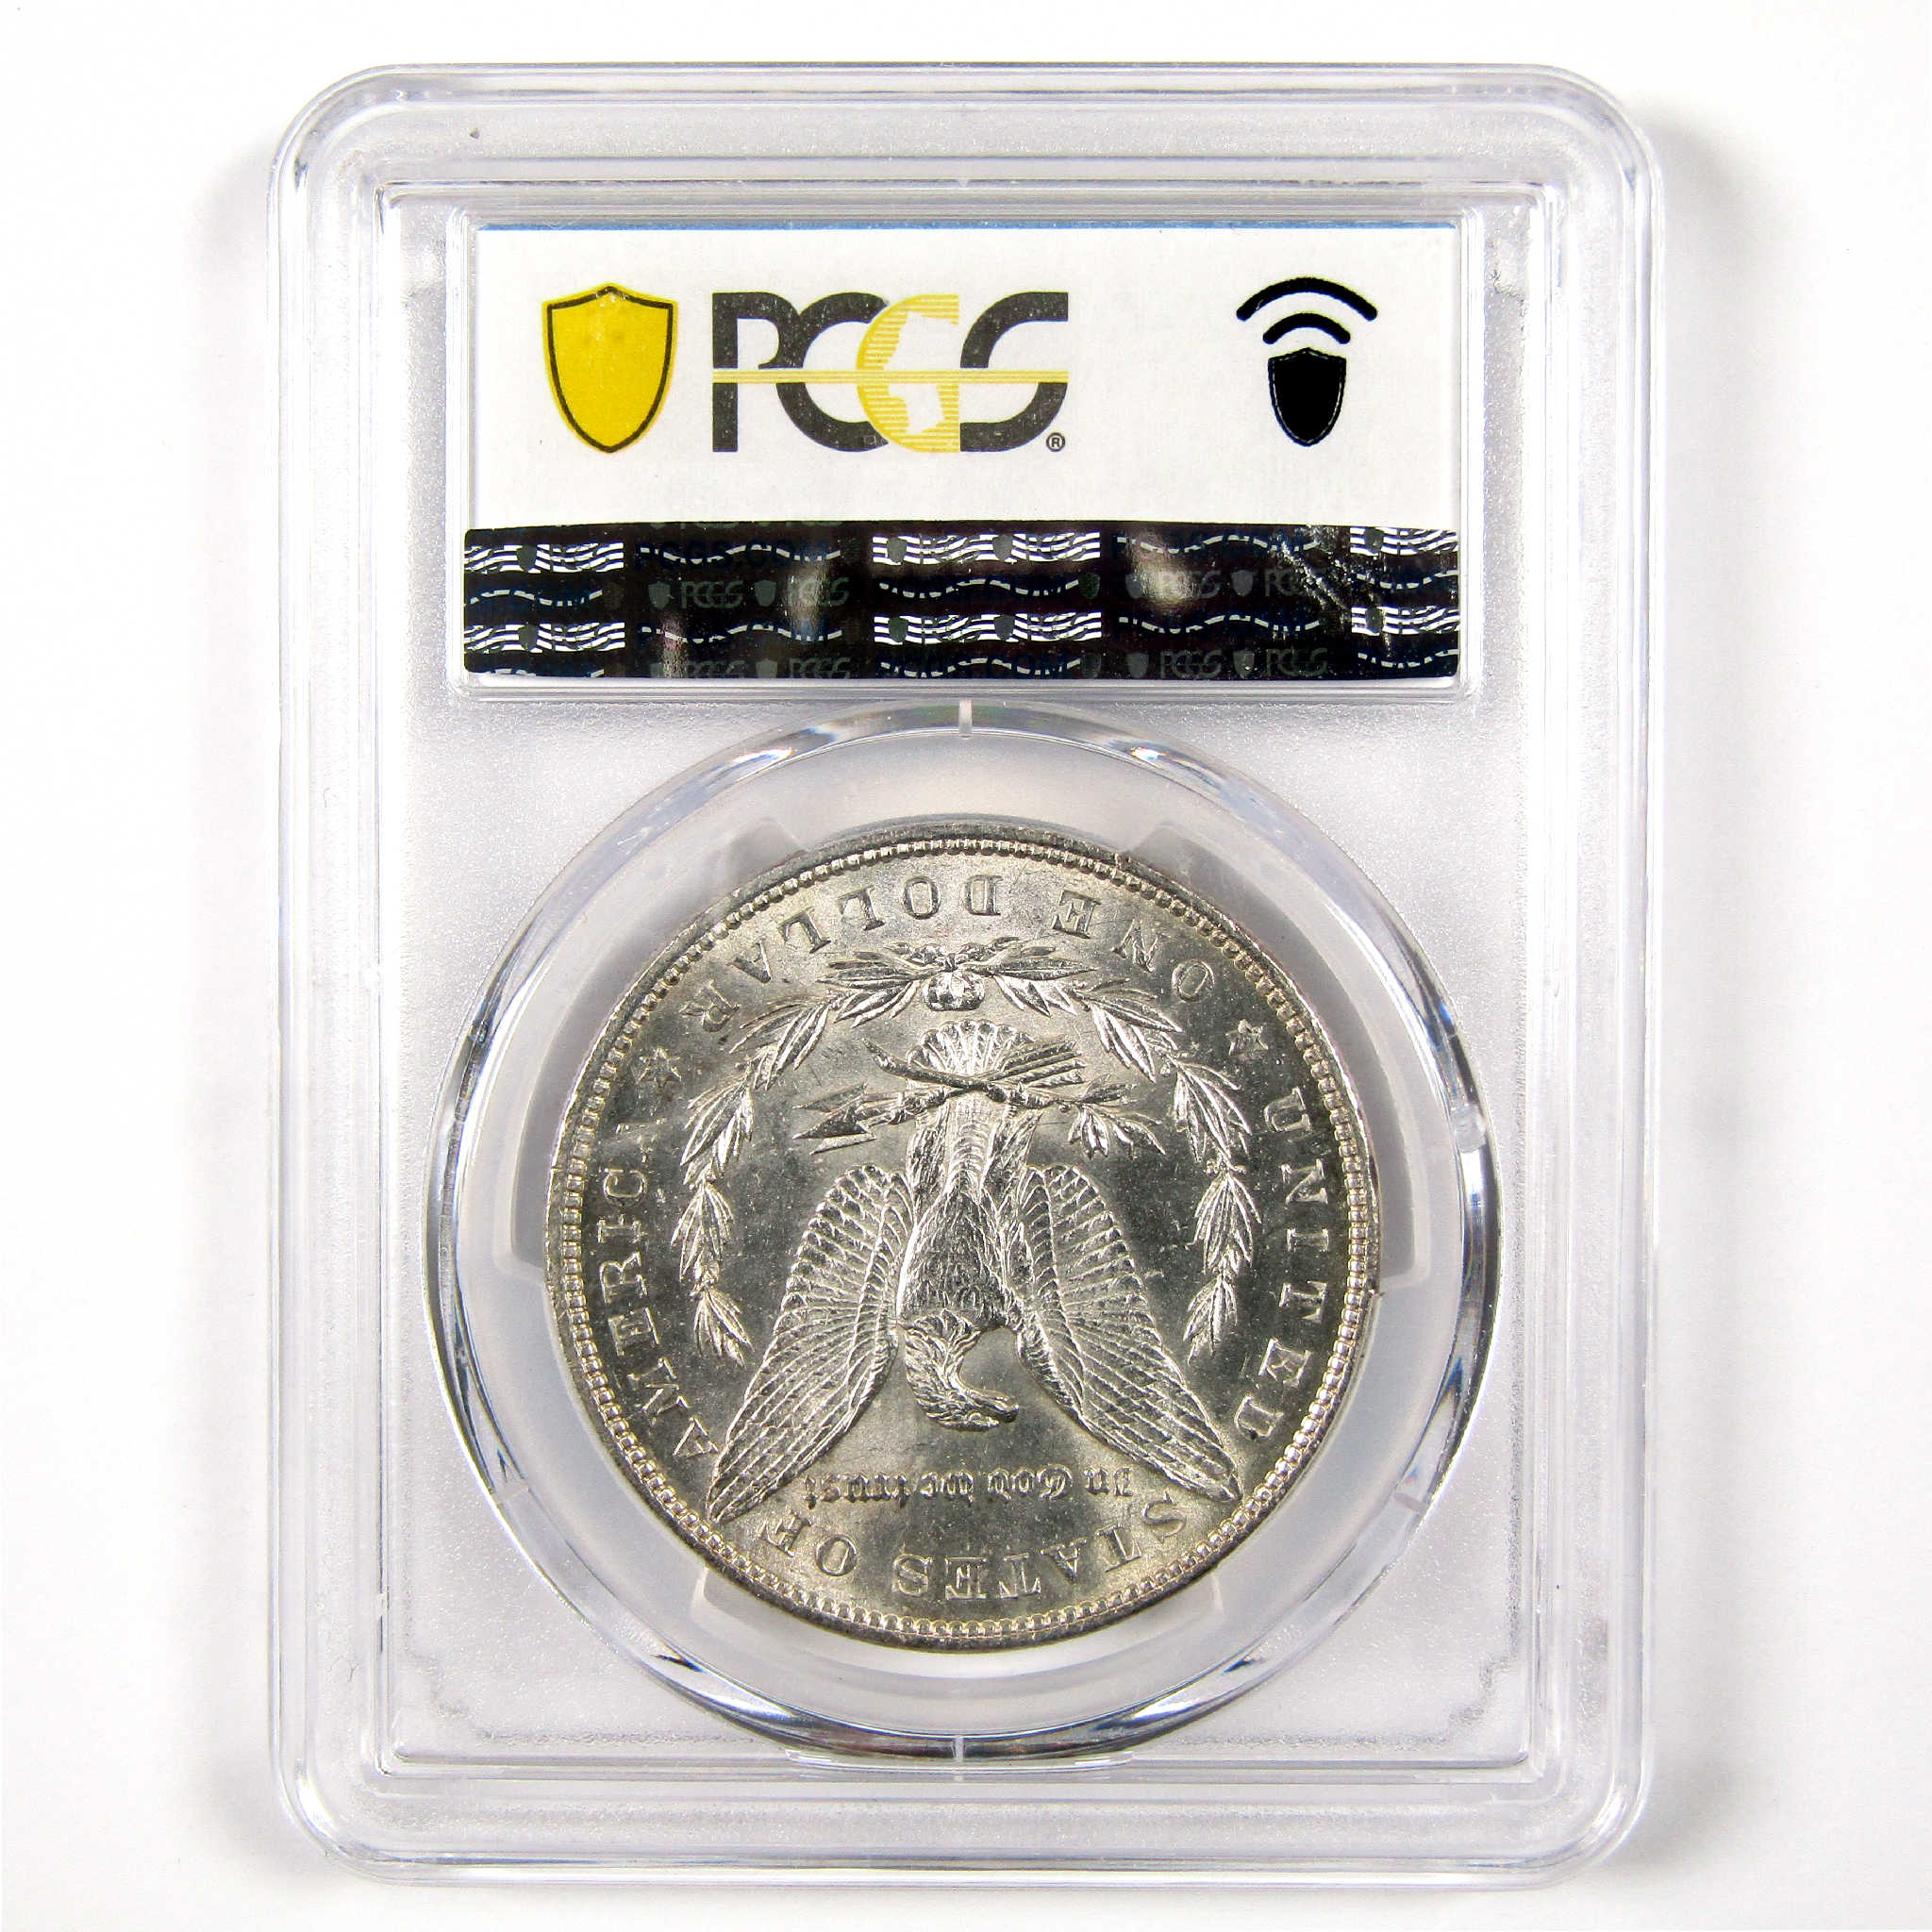 1878 7TF Rev 79 Morgan Dollar MS 62 PCGS Silver $1 Unc SKU:I11309 - Morgan coin - Morgan silver dollar - Morgan silver dollar for sale - Profile Coins &amp; Collectibles